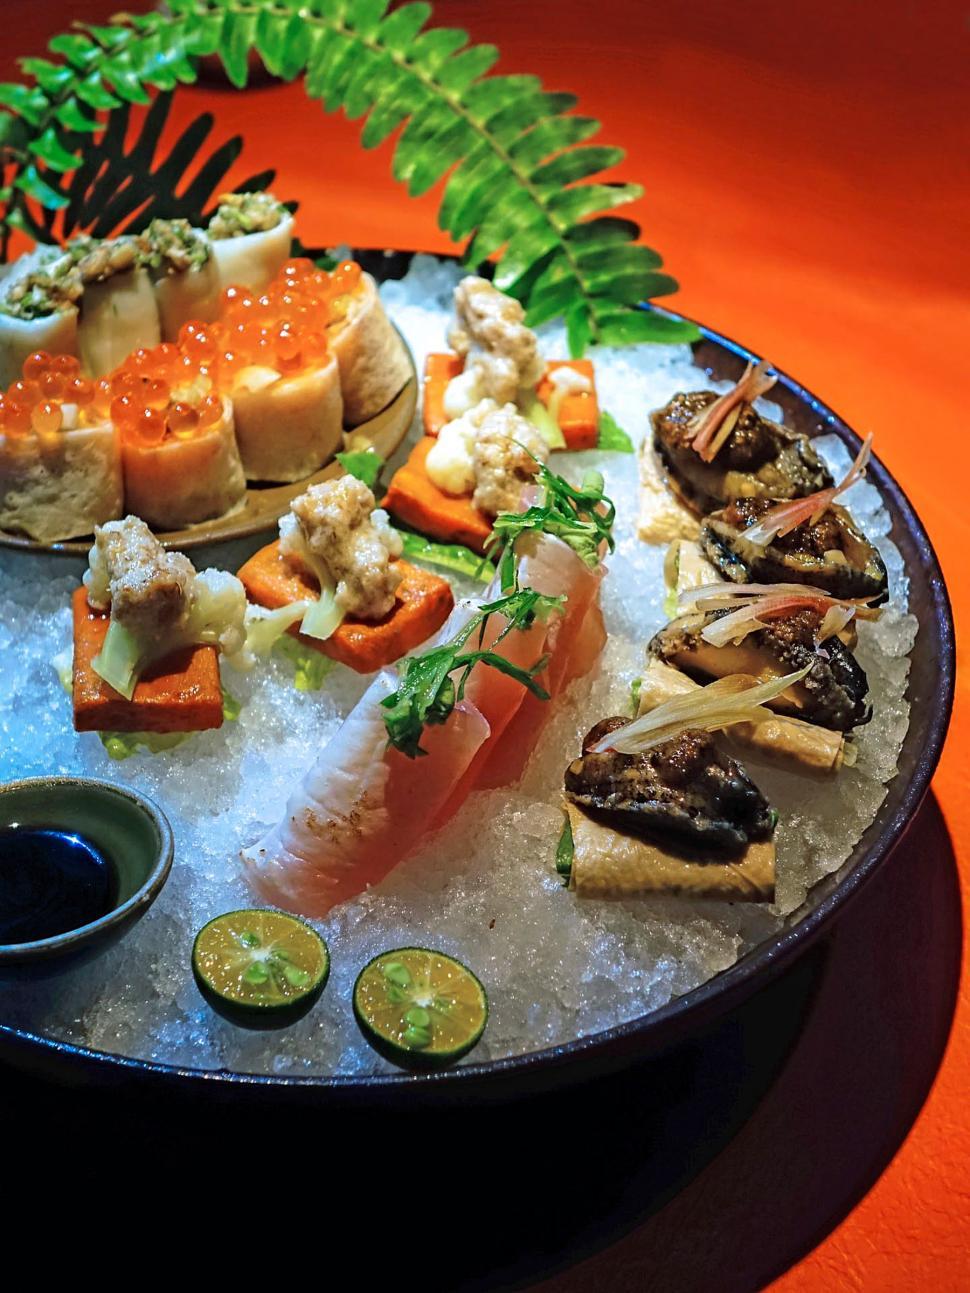 Free Image of A Platter of Sushi and Various Food on a Table 